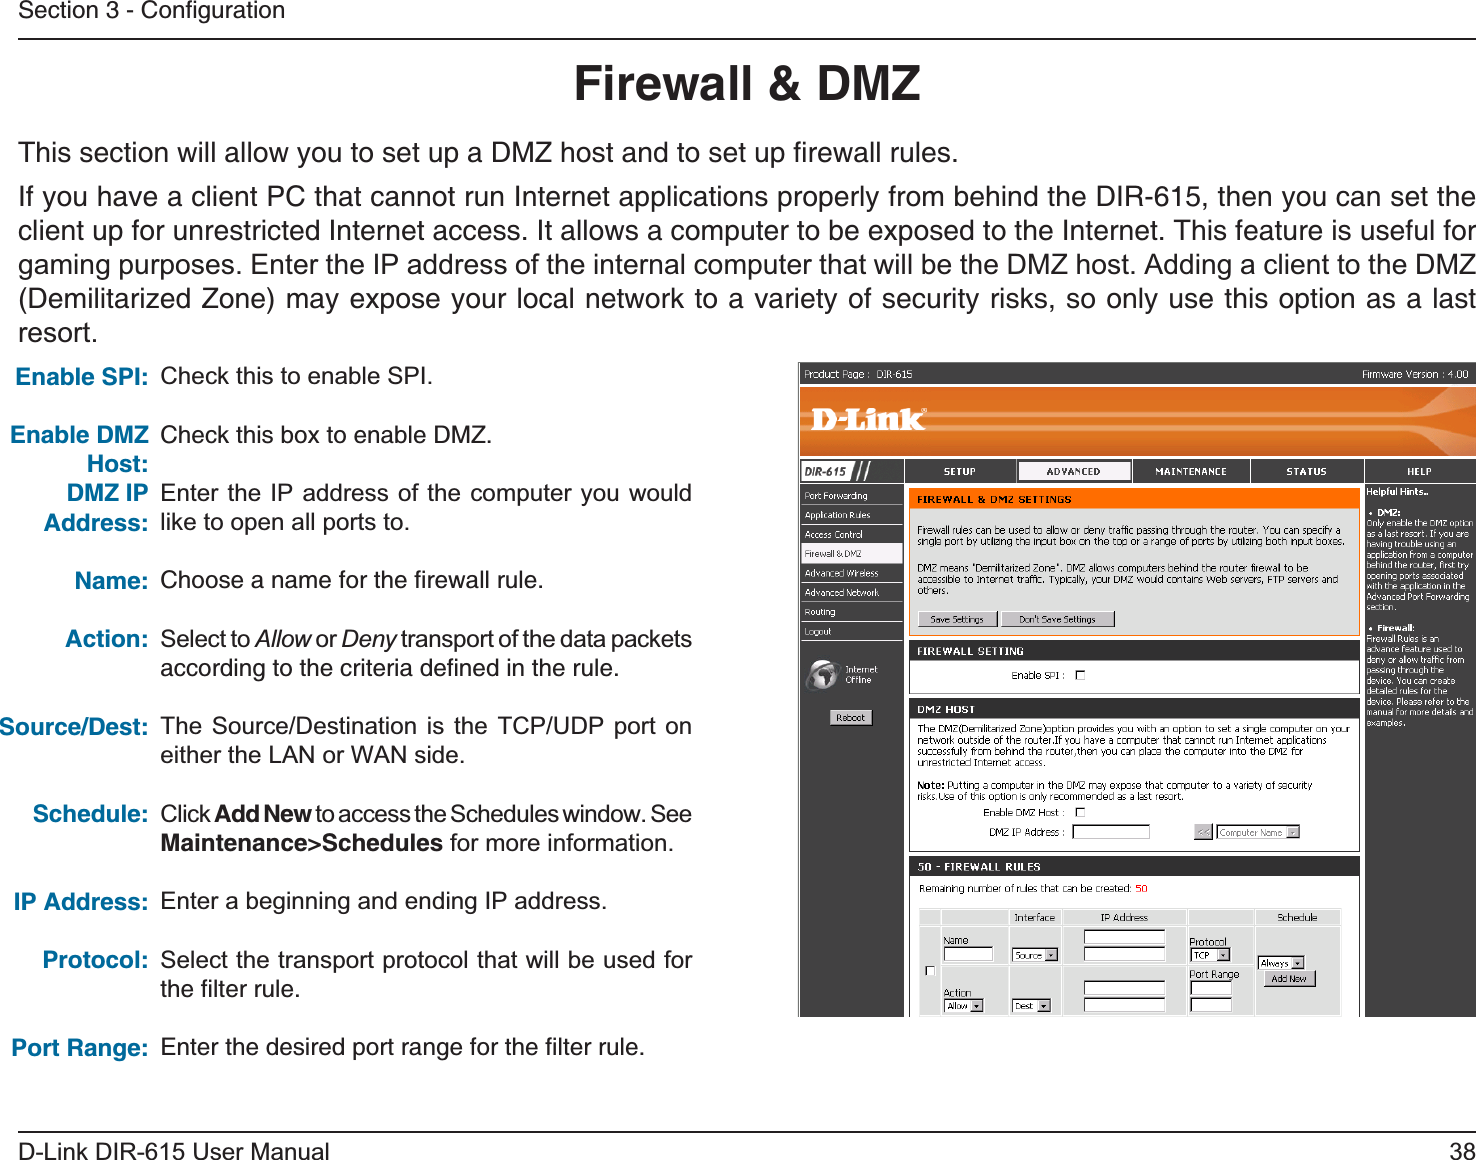 38D-Link DIR-615 User ManualSection 3 - ConﬁgurationFirewall &amp; DMZThis section will allow you to set up a DMZ host and to set up ﬁrewall rules.If you have a client PC that cannot run Internet applications properly from behind the DIR-615, then you can set the client up for unrestricted Internet access. It allows a computer to be exposed to the Internet. This feature is useful for gaming purposes. Enter the IP address of the internal computer that will be the DMZ host. Adding a client to the DMZ (Demilitarized Zone) may expose your local network to a variety of security risks, so only use this option as a last resort.Check this to enable SPI.Check this box to enable DMZ.Enter the IP address of the computer you would like to open all ports to.Choose a name for the ﬁrewall rule.Select to Allow or Deny transport of the data packets according to the criteria deﬁned in the rule. The Source/Destination is the TCP/UDP port on either the LAN or WAN side.Click Add New to access the Schedules window. See Maintenance&gt;Schedules for more information.Enter a beginning and ending IP address.Select the transport protocol that will be used for the ﬁlter rule.Enter the desired port range for the ﬁlter rule.Enable DMZ Host:DMZ IP Address:Name:Action:Source/Dest:Schedule:IP Address:Protocol:Port Range: Enable SPI:   